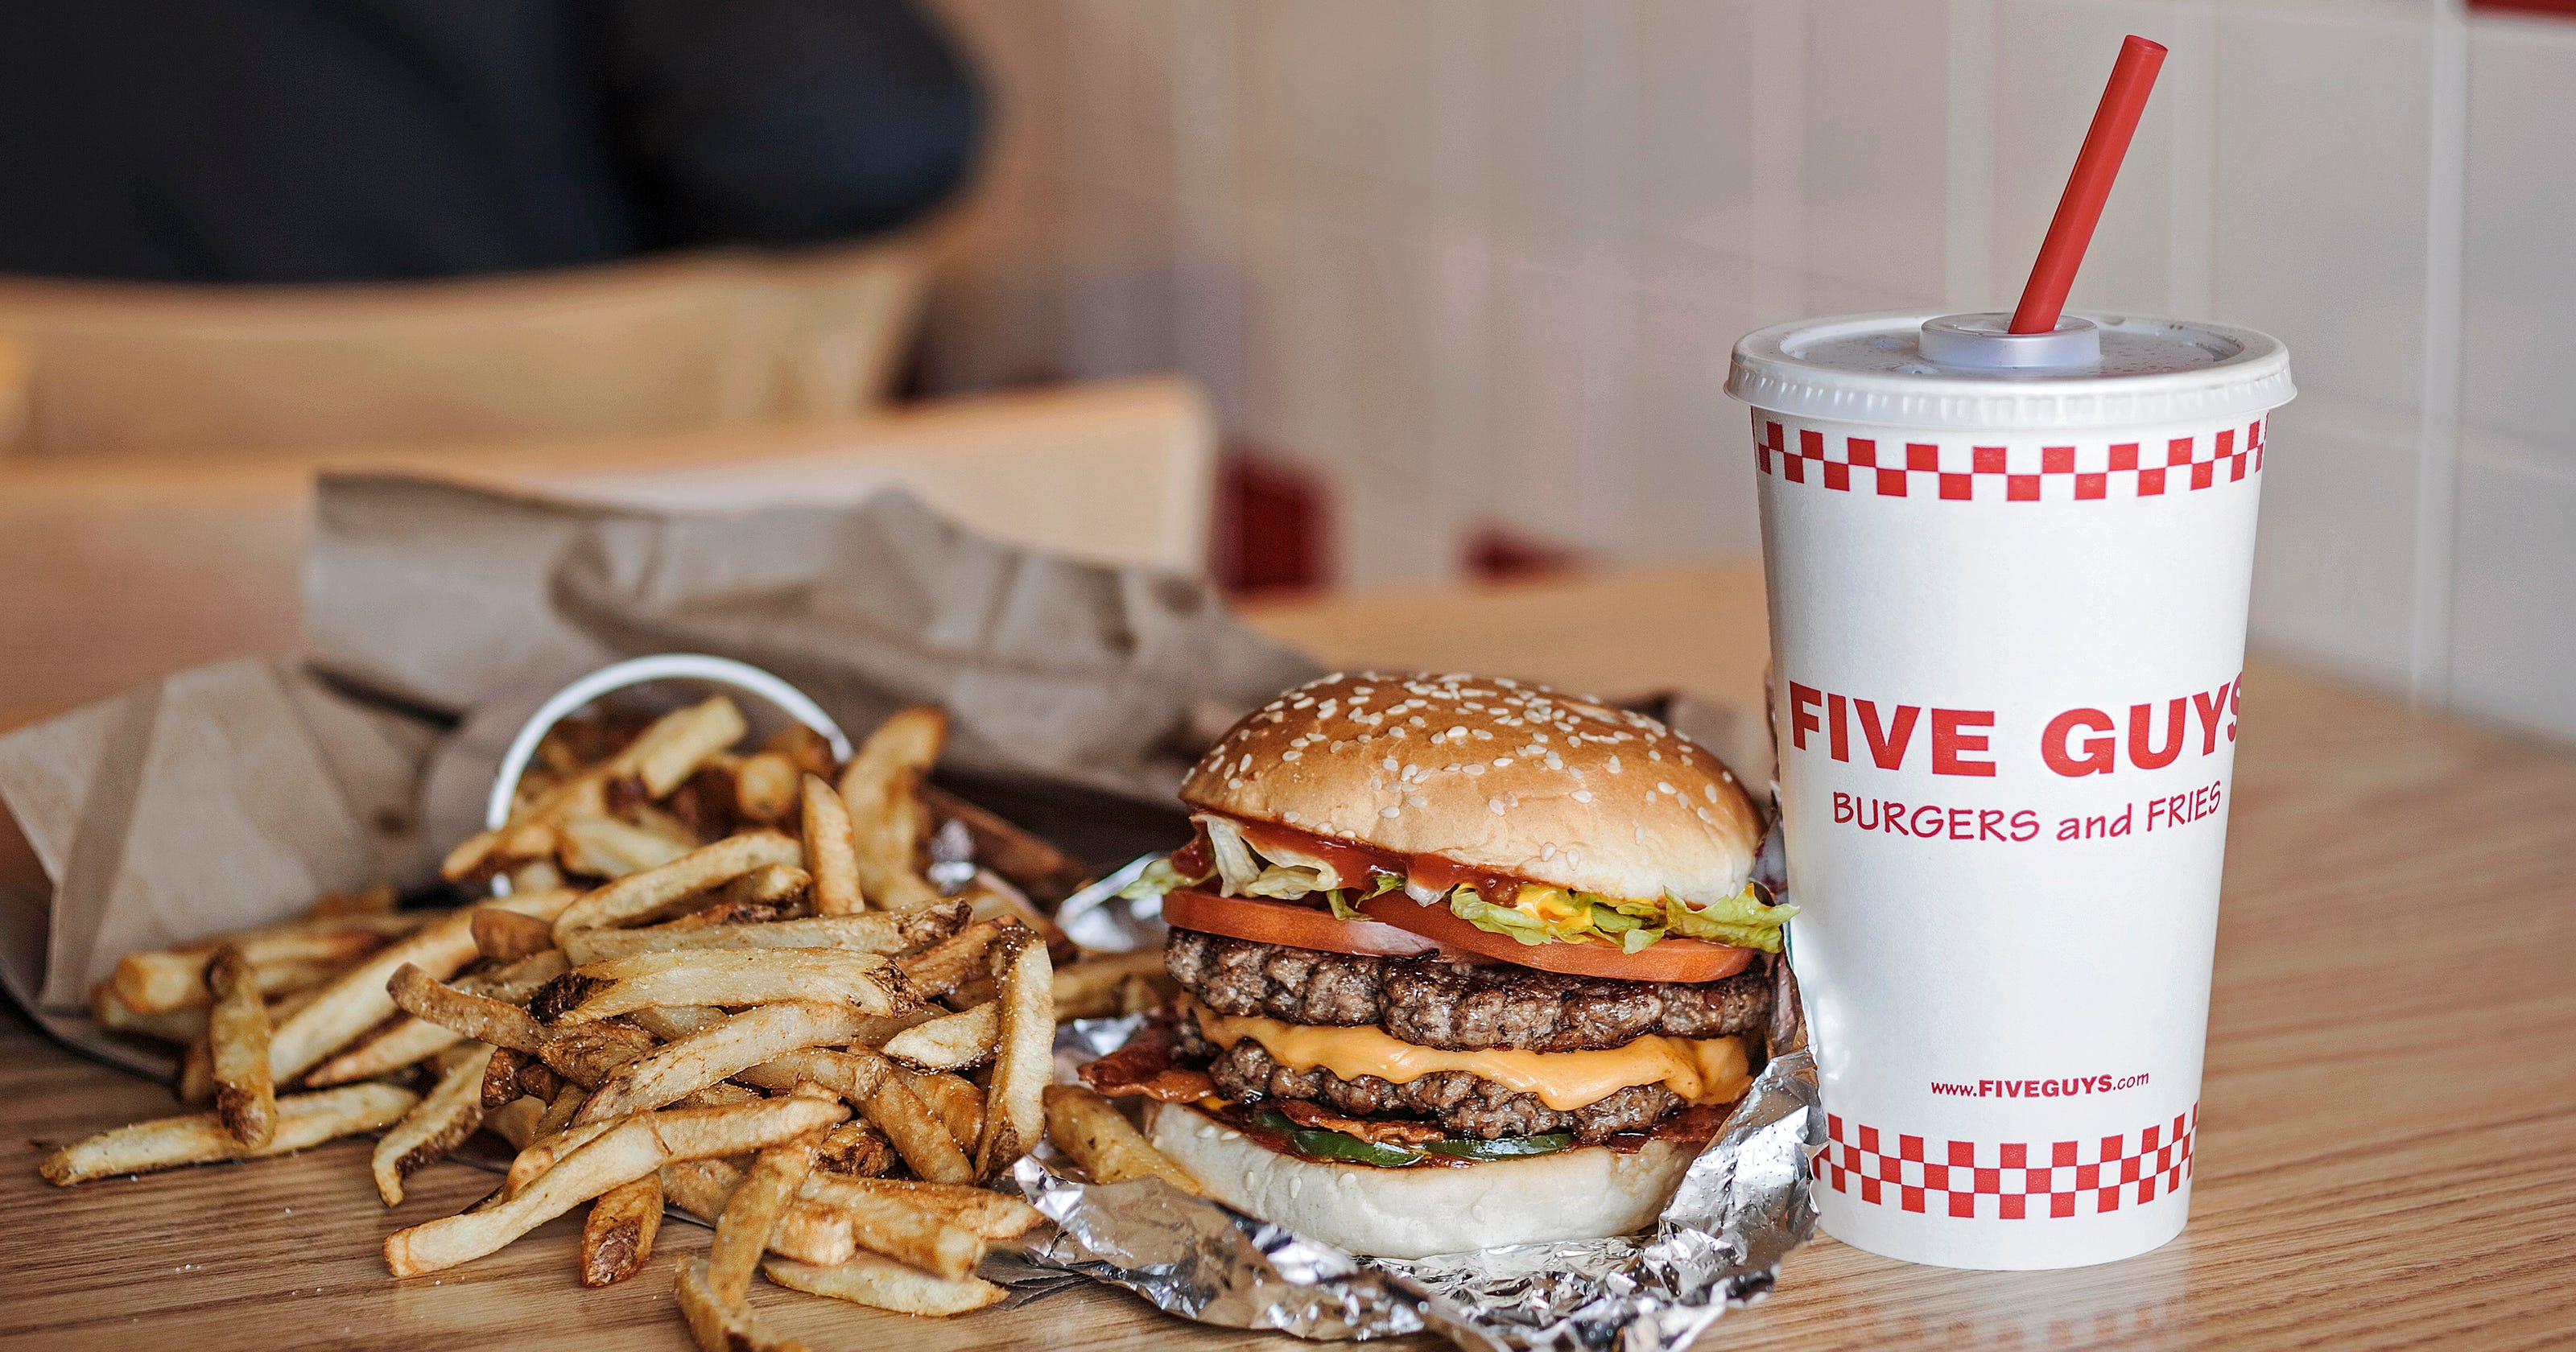 Five Guys is coming to West Des Moines